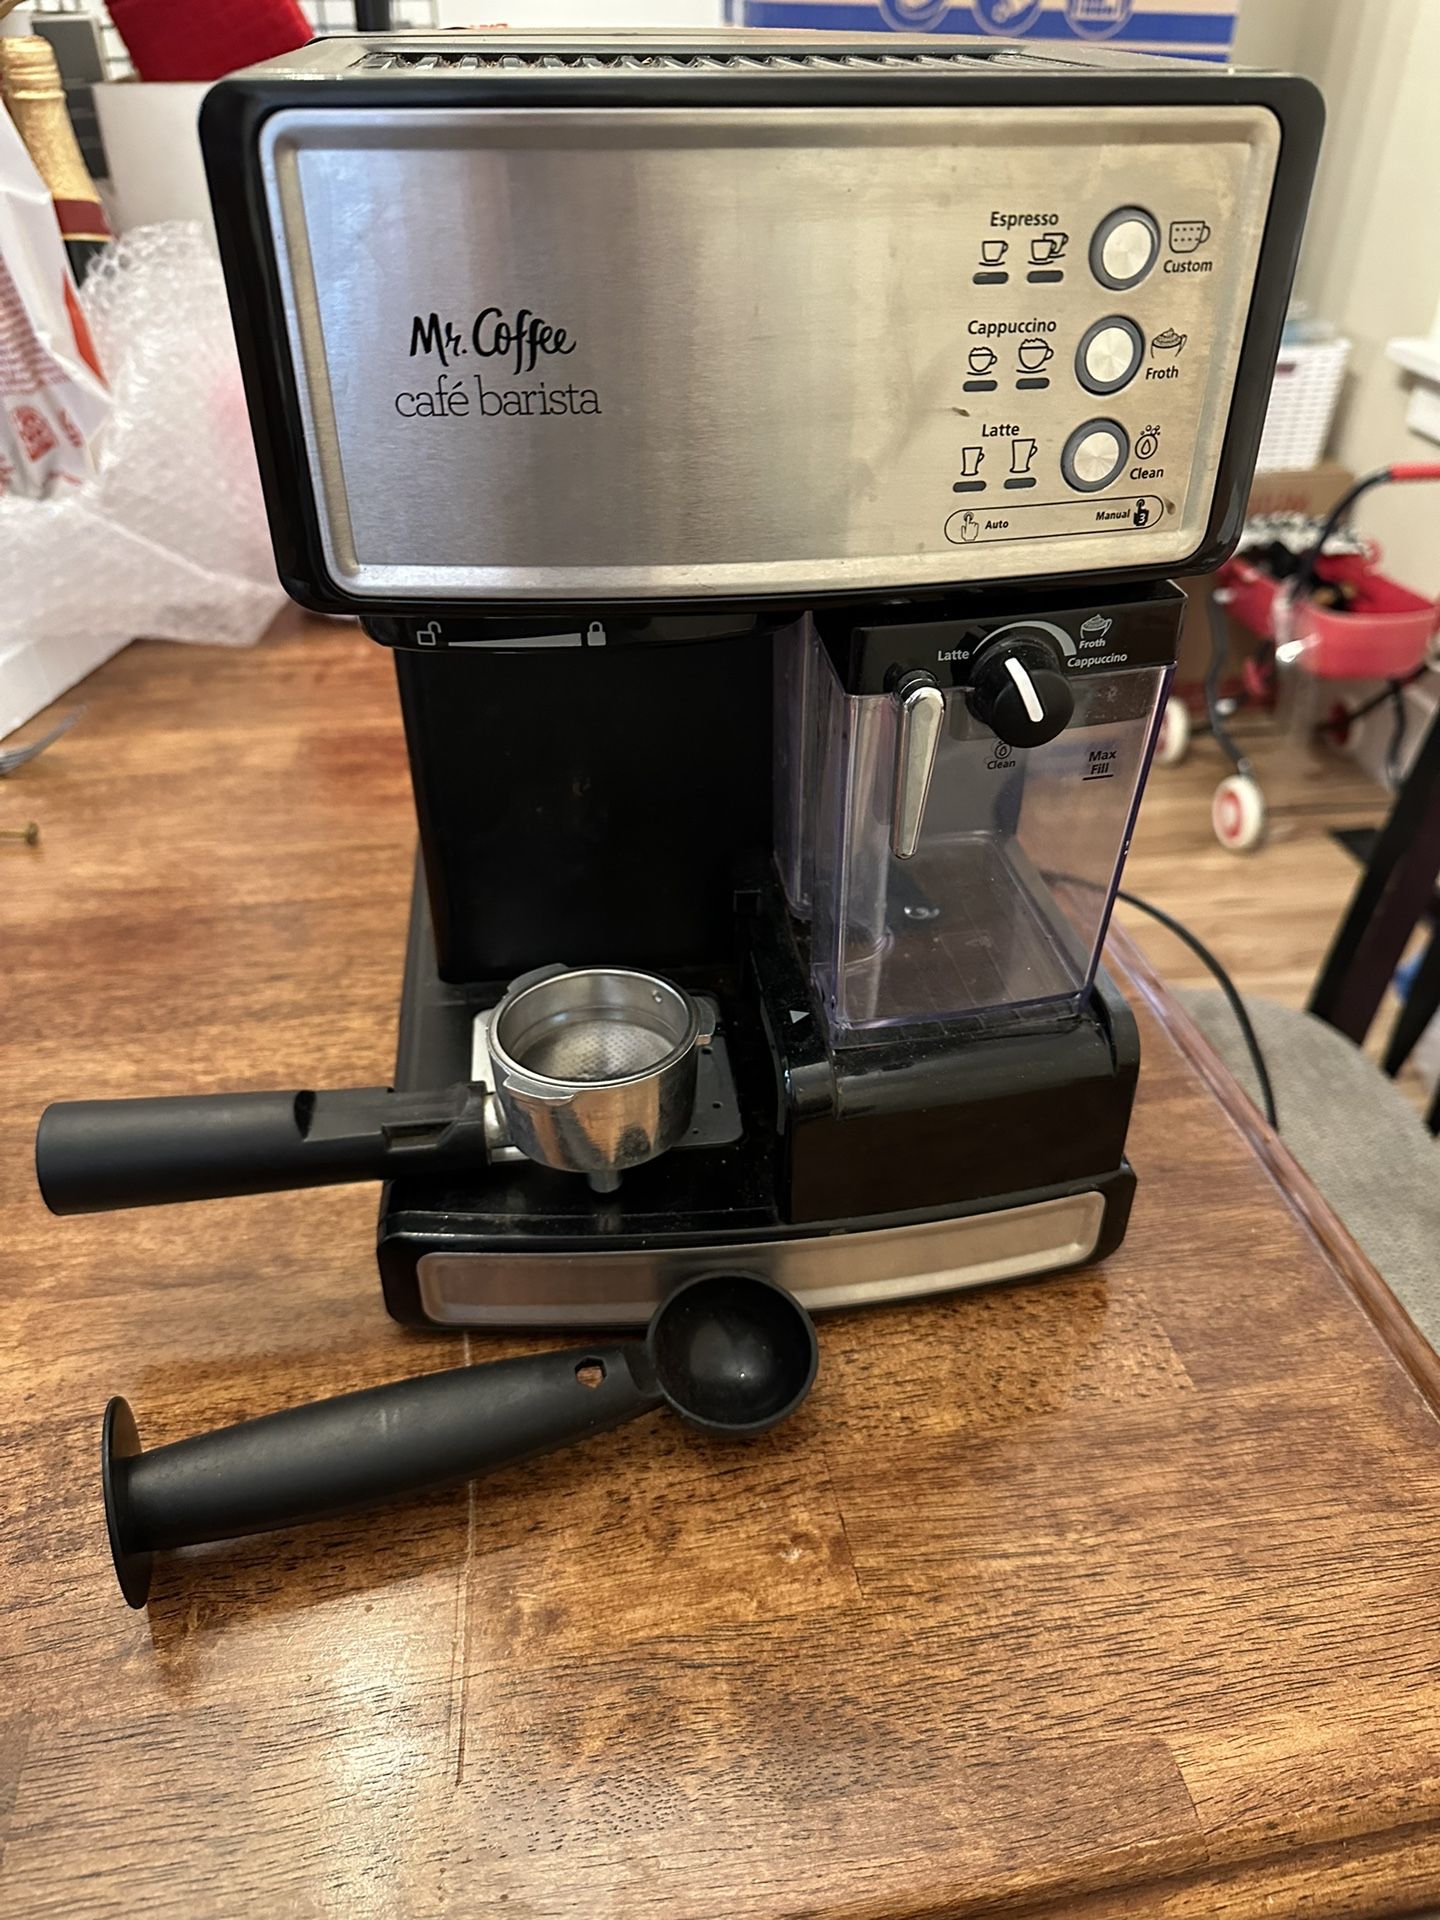 Mr Coffee Cafe Barista for Sale in Edgewood, WA - OfferUp